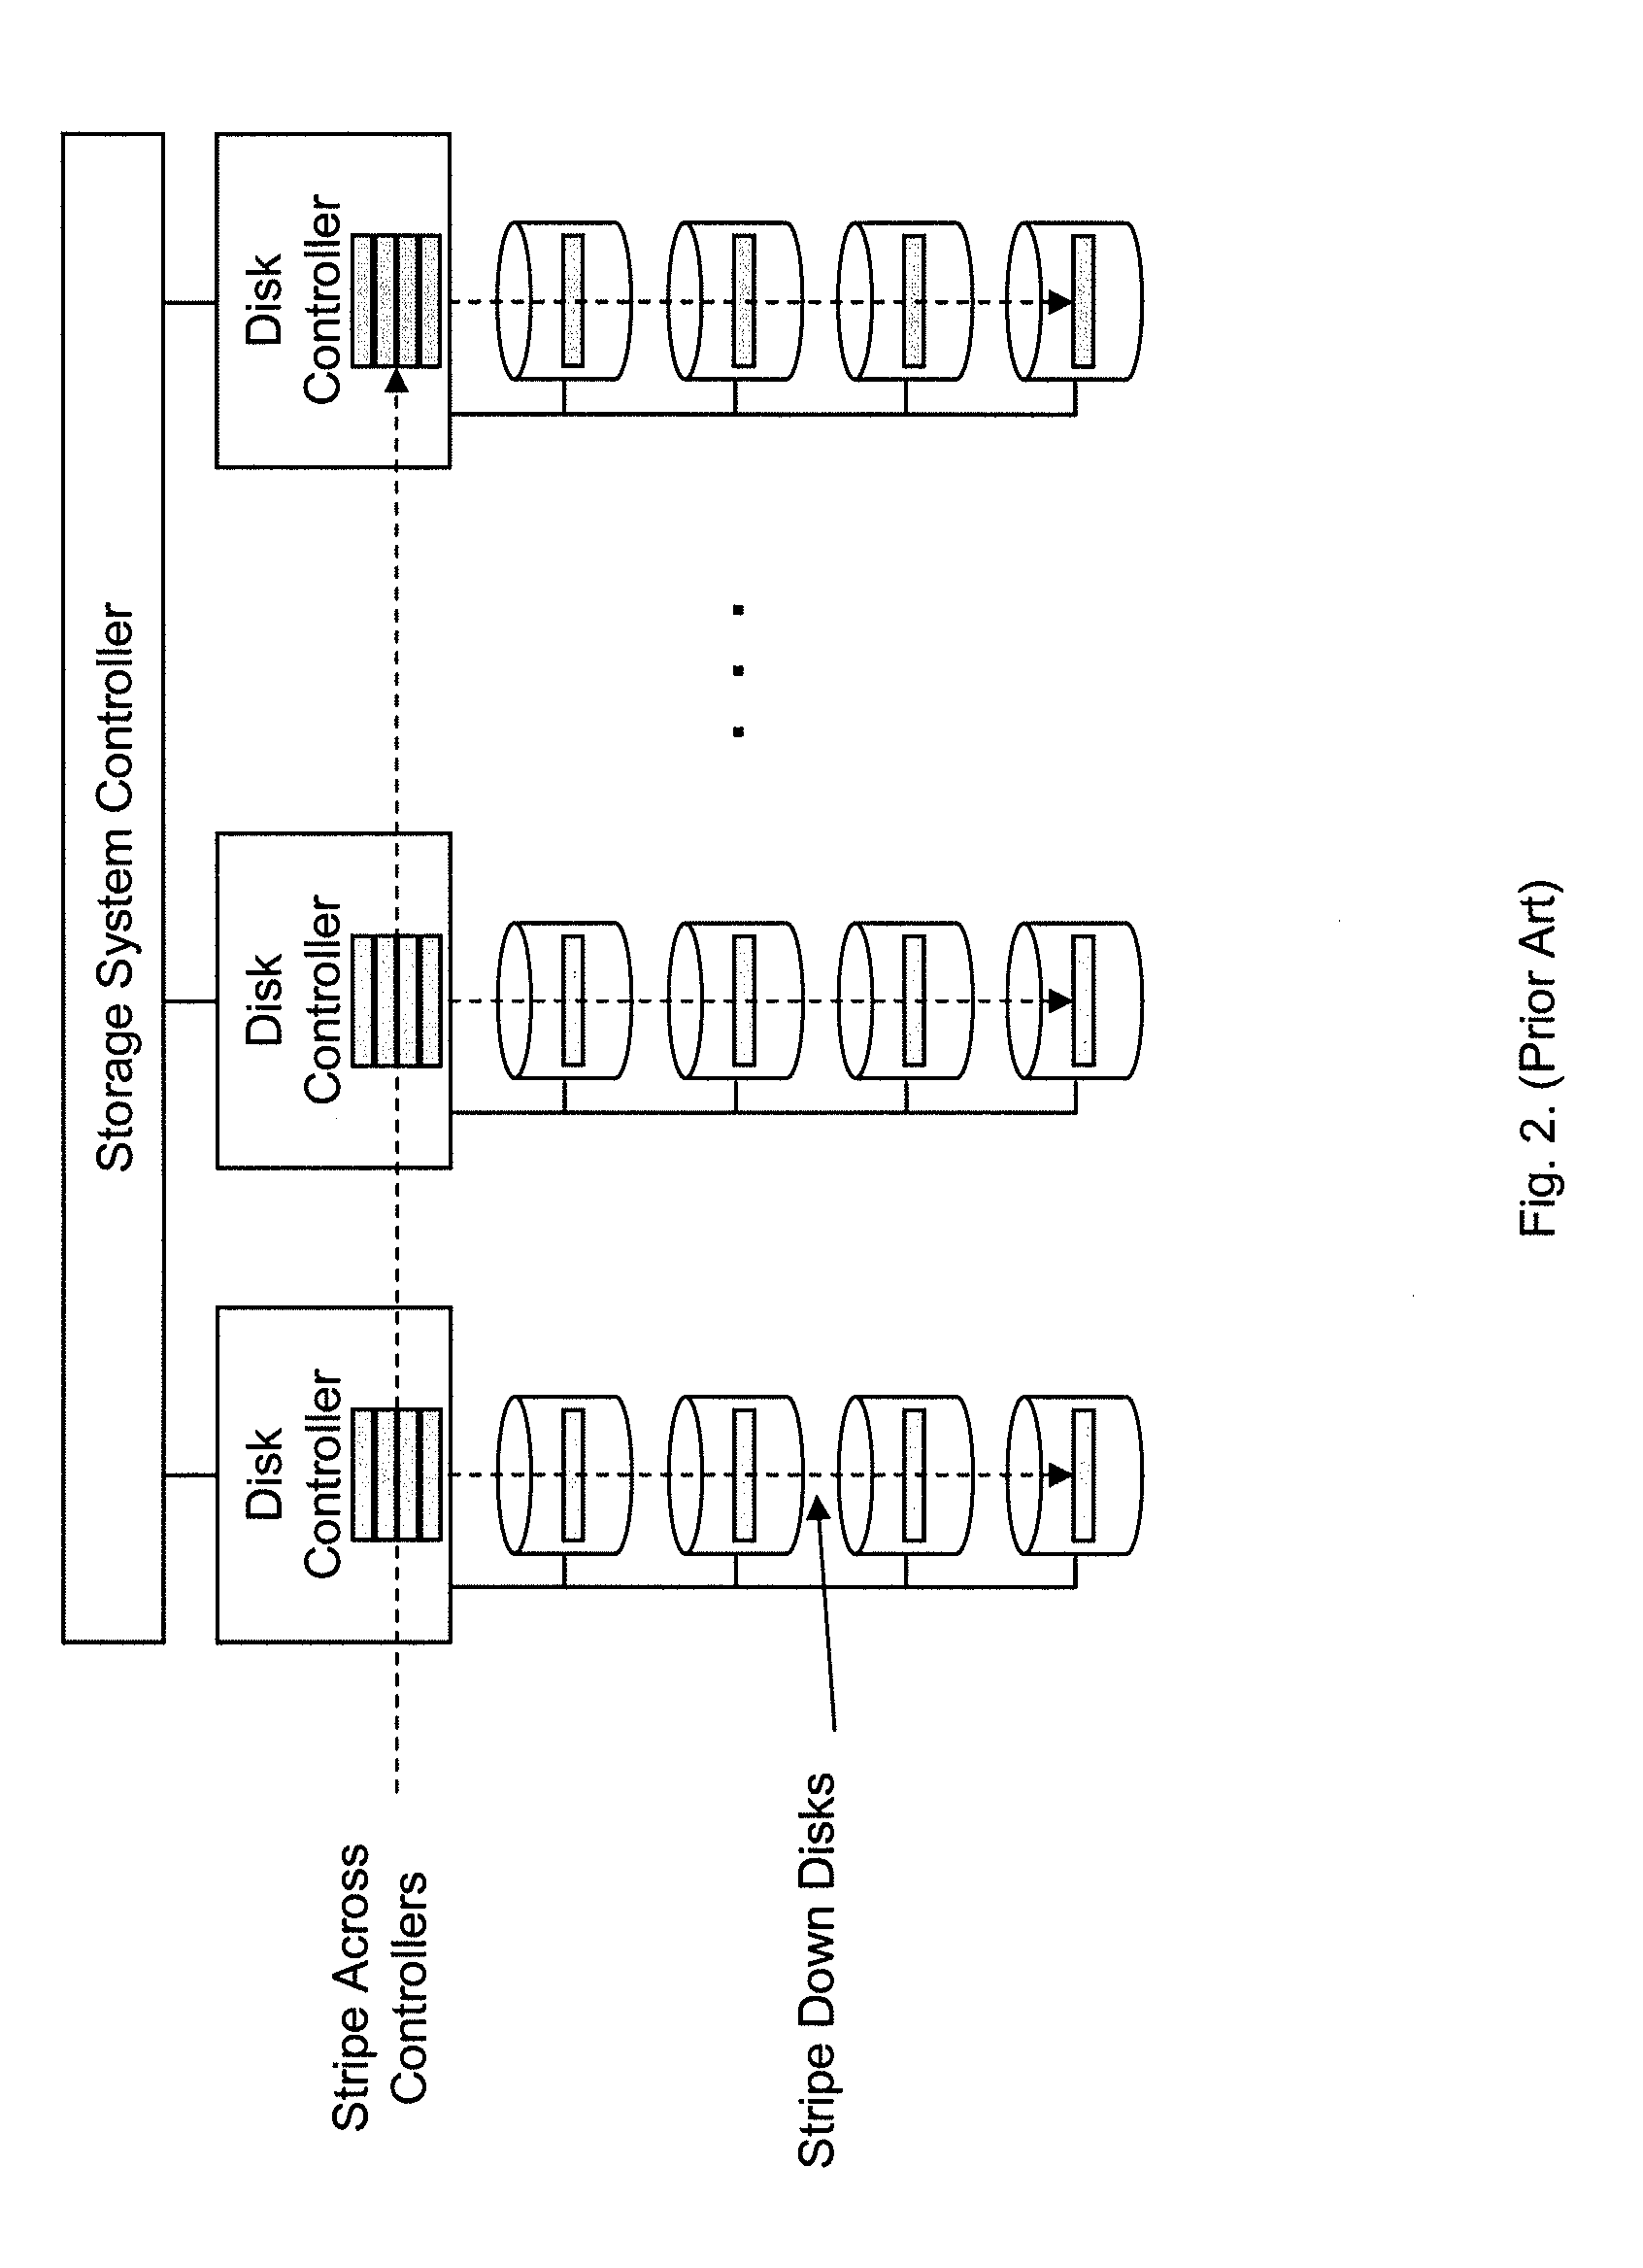 Storage of data utilizing scheduling queue locations associated with different data rates